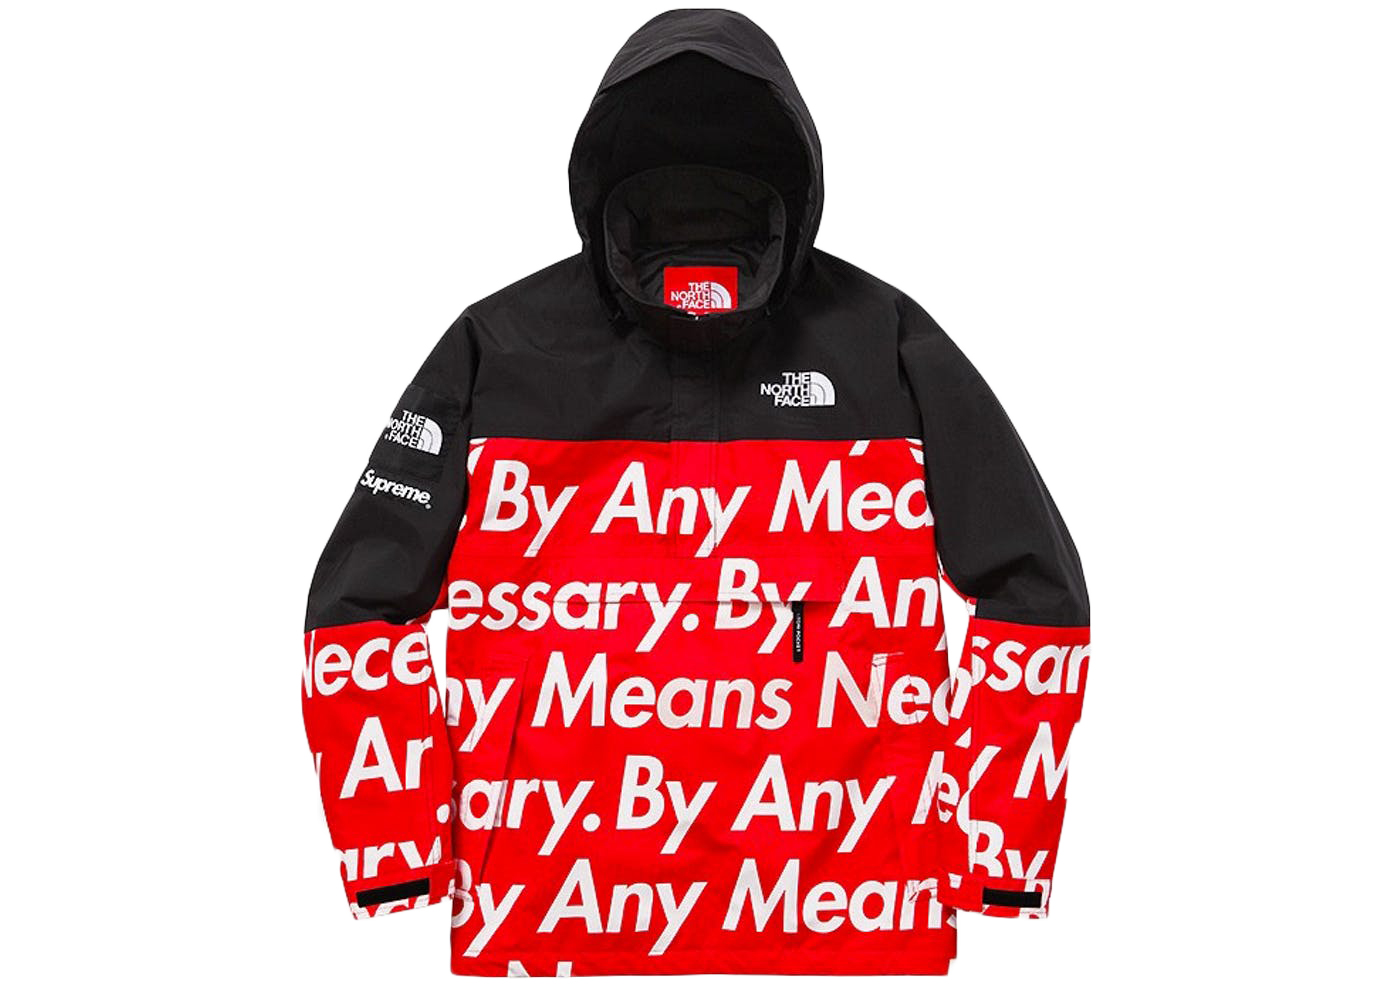 supreme north face mountain jacket red M